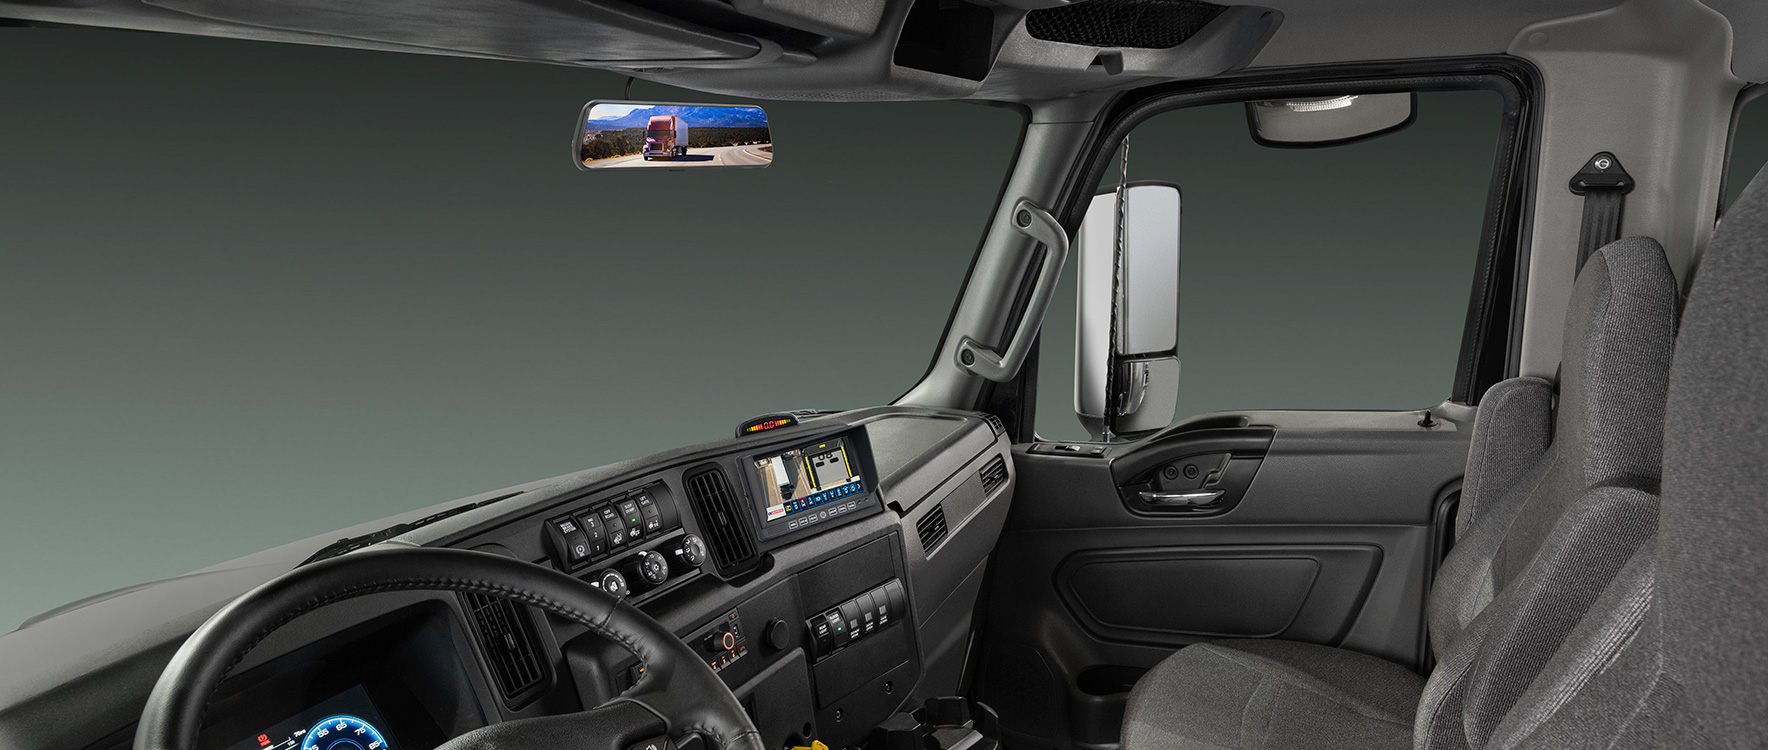 View inside of International semi cab showing installed Situational Awareness Package 5.0